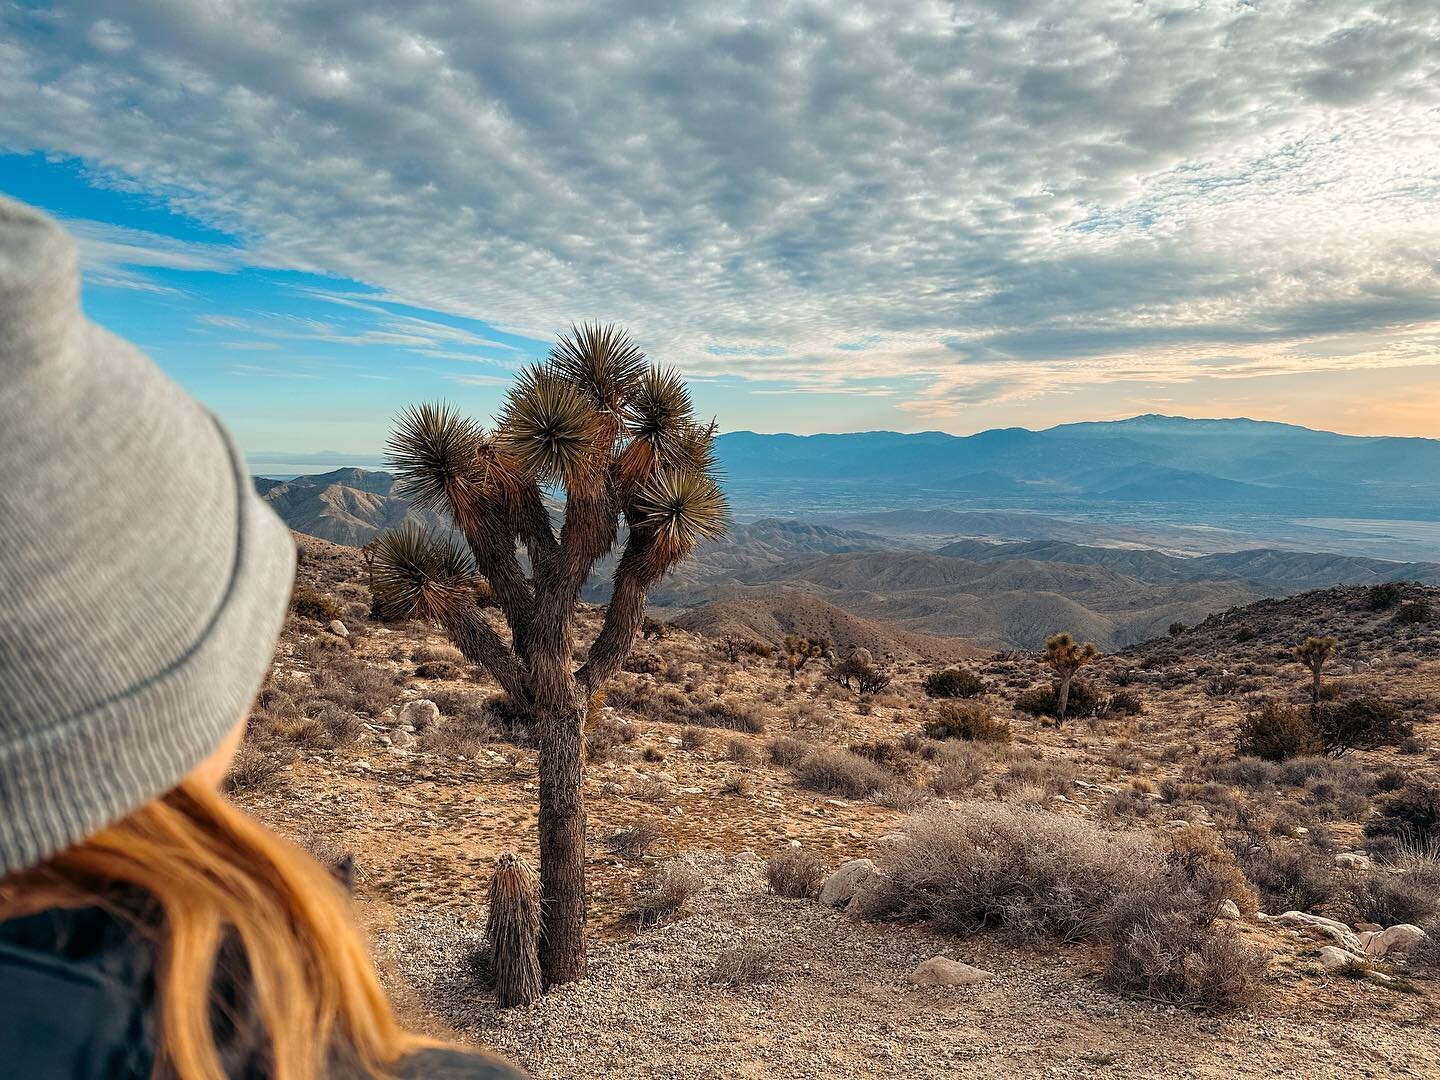 Joshua Tree National Park has been on my travel list for so many years, and our time there was everything I&rsquo;d hoped for and more. We spent 2.5 days in the park, and I don&rsquo;t think we&rsquo;ve ever been so tired or so excited to wake up and